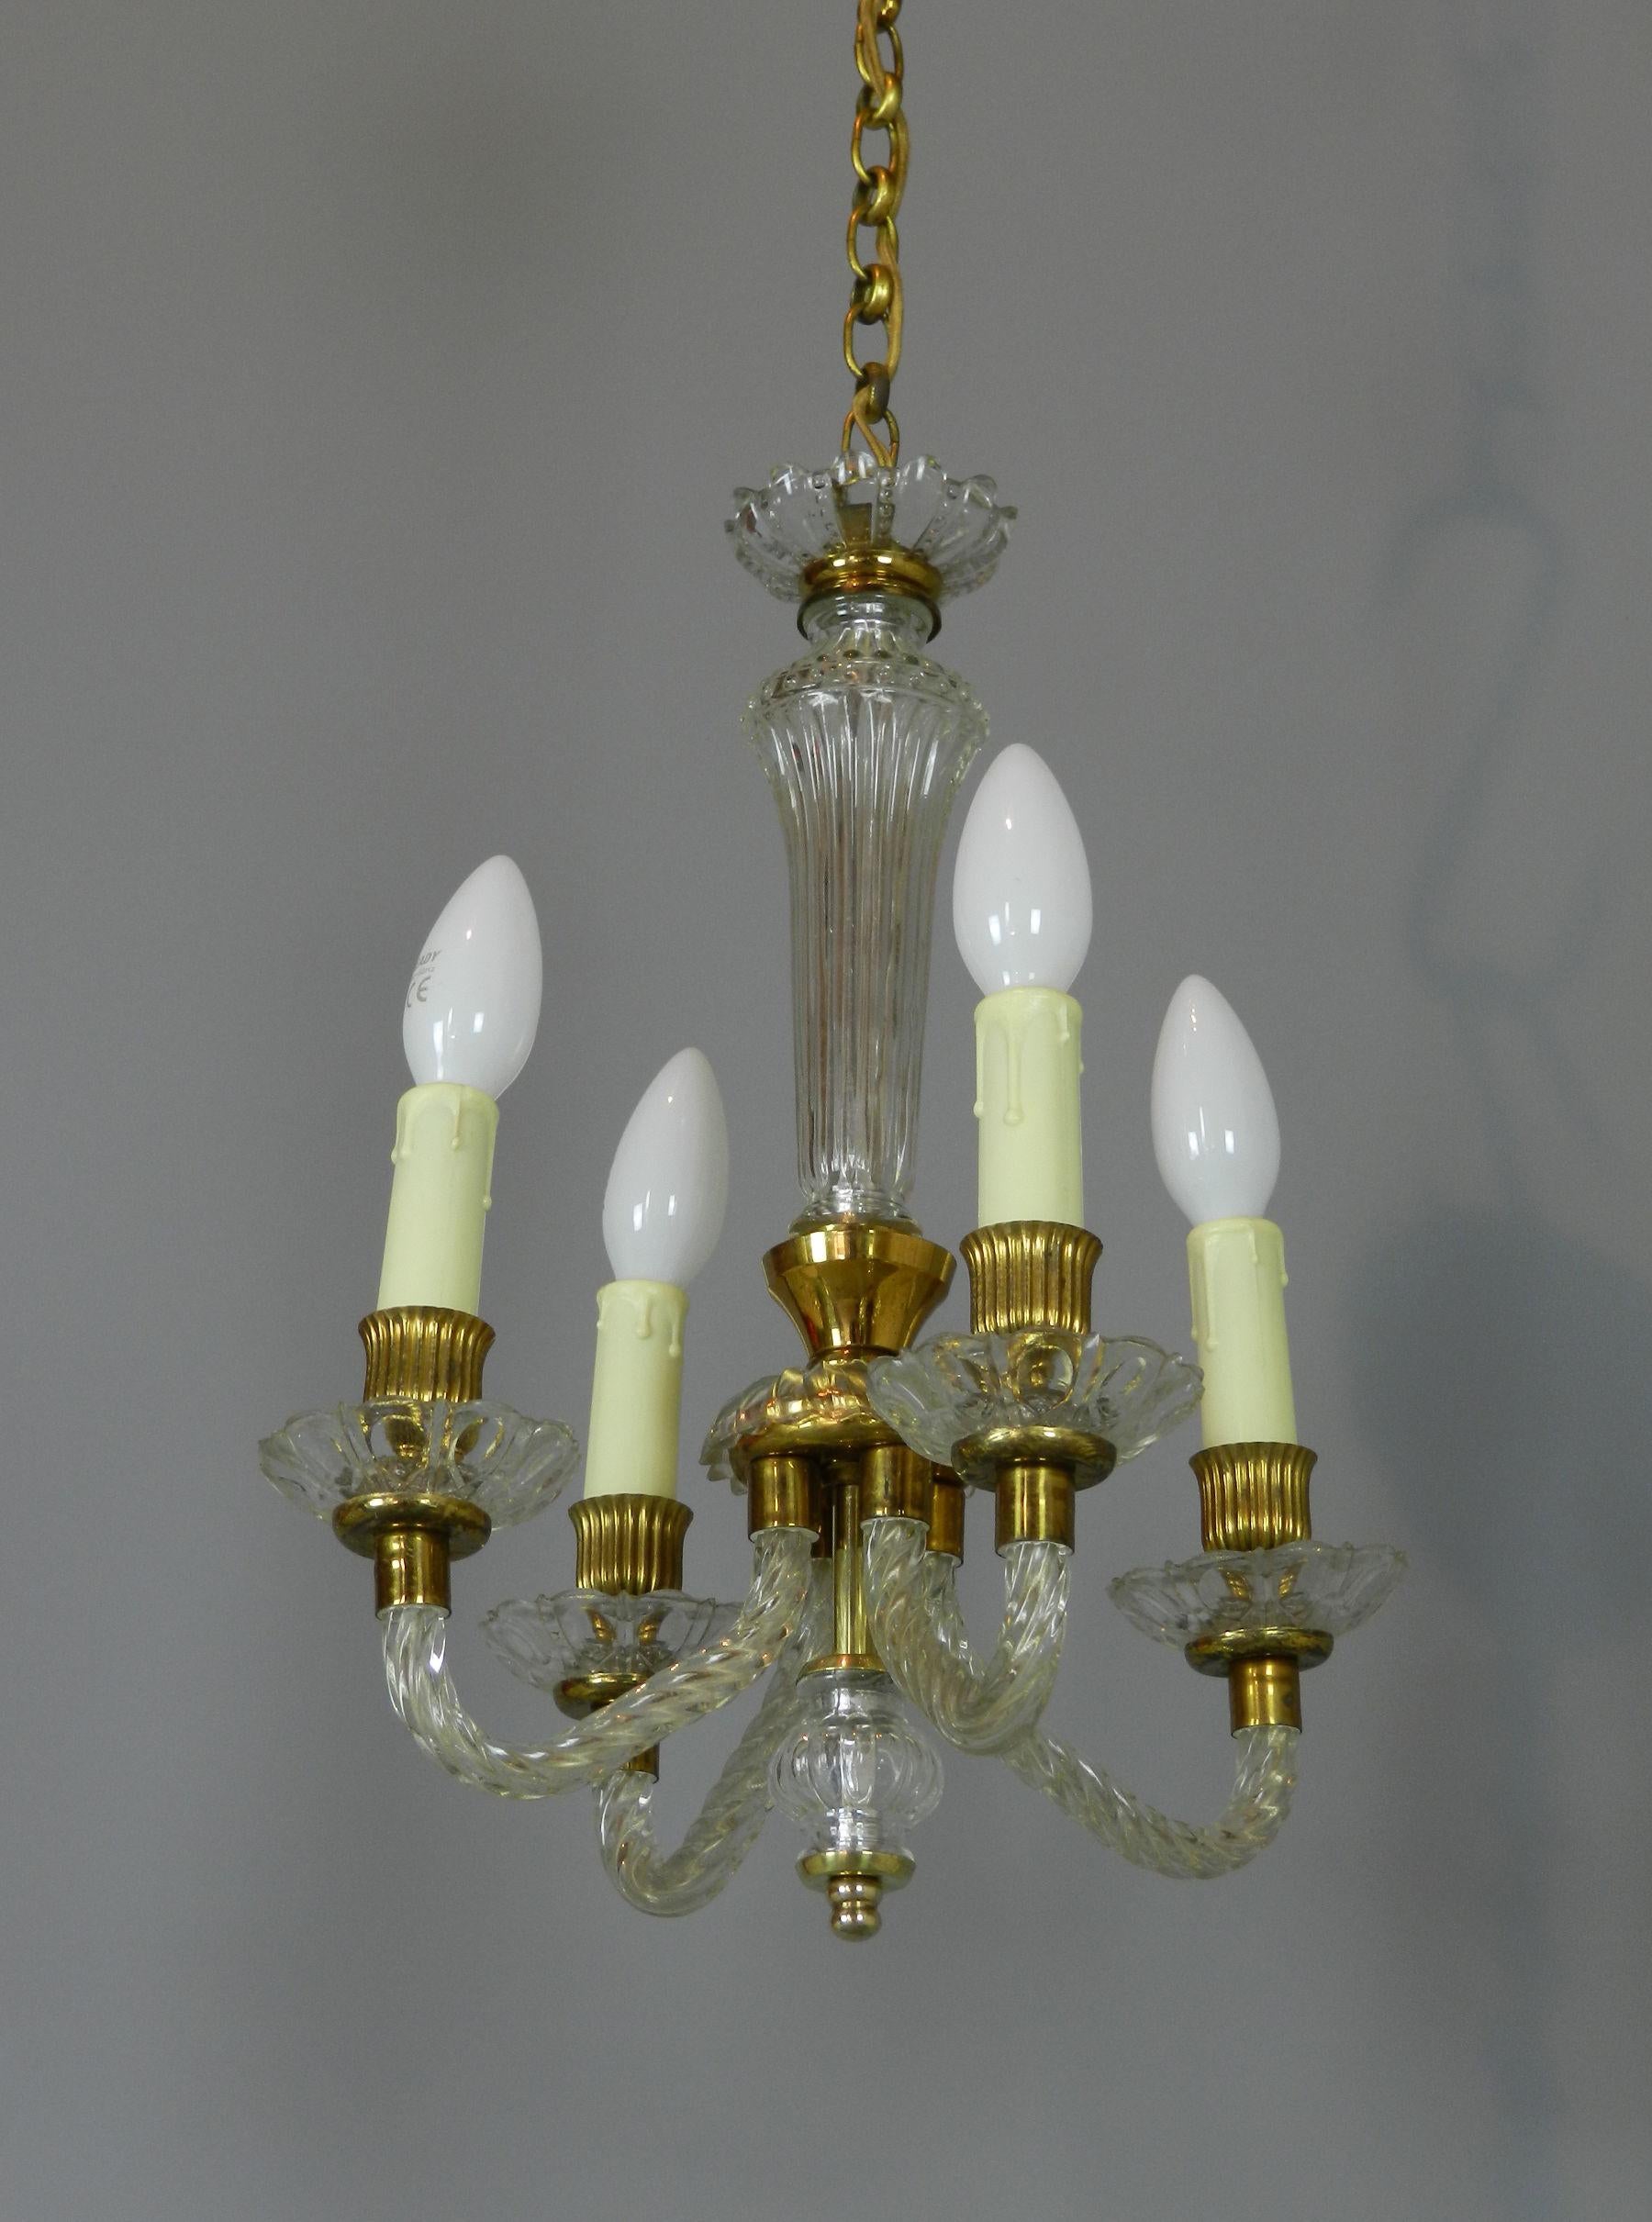 A very pretty four light chandelier in Murano glass with gold metal work.

The central column leads down to four twisted glass arms holding candle light bulbs.

Tested and in full working order. As with all lighting we advise that it is checked